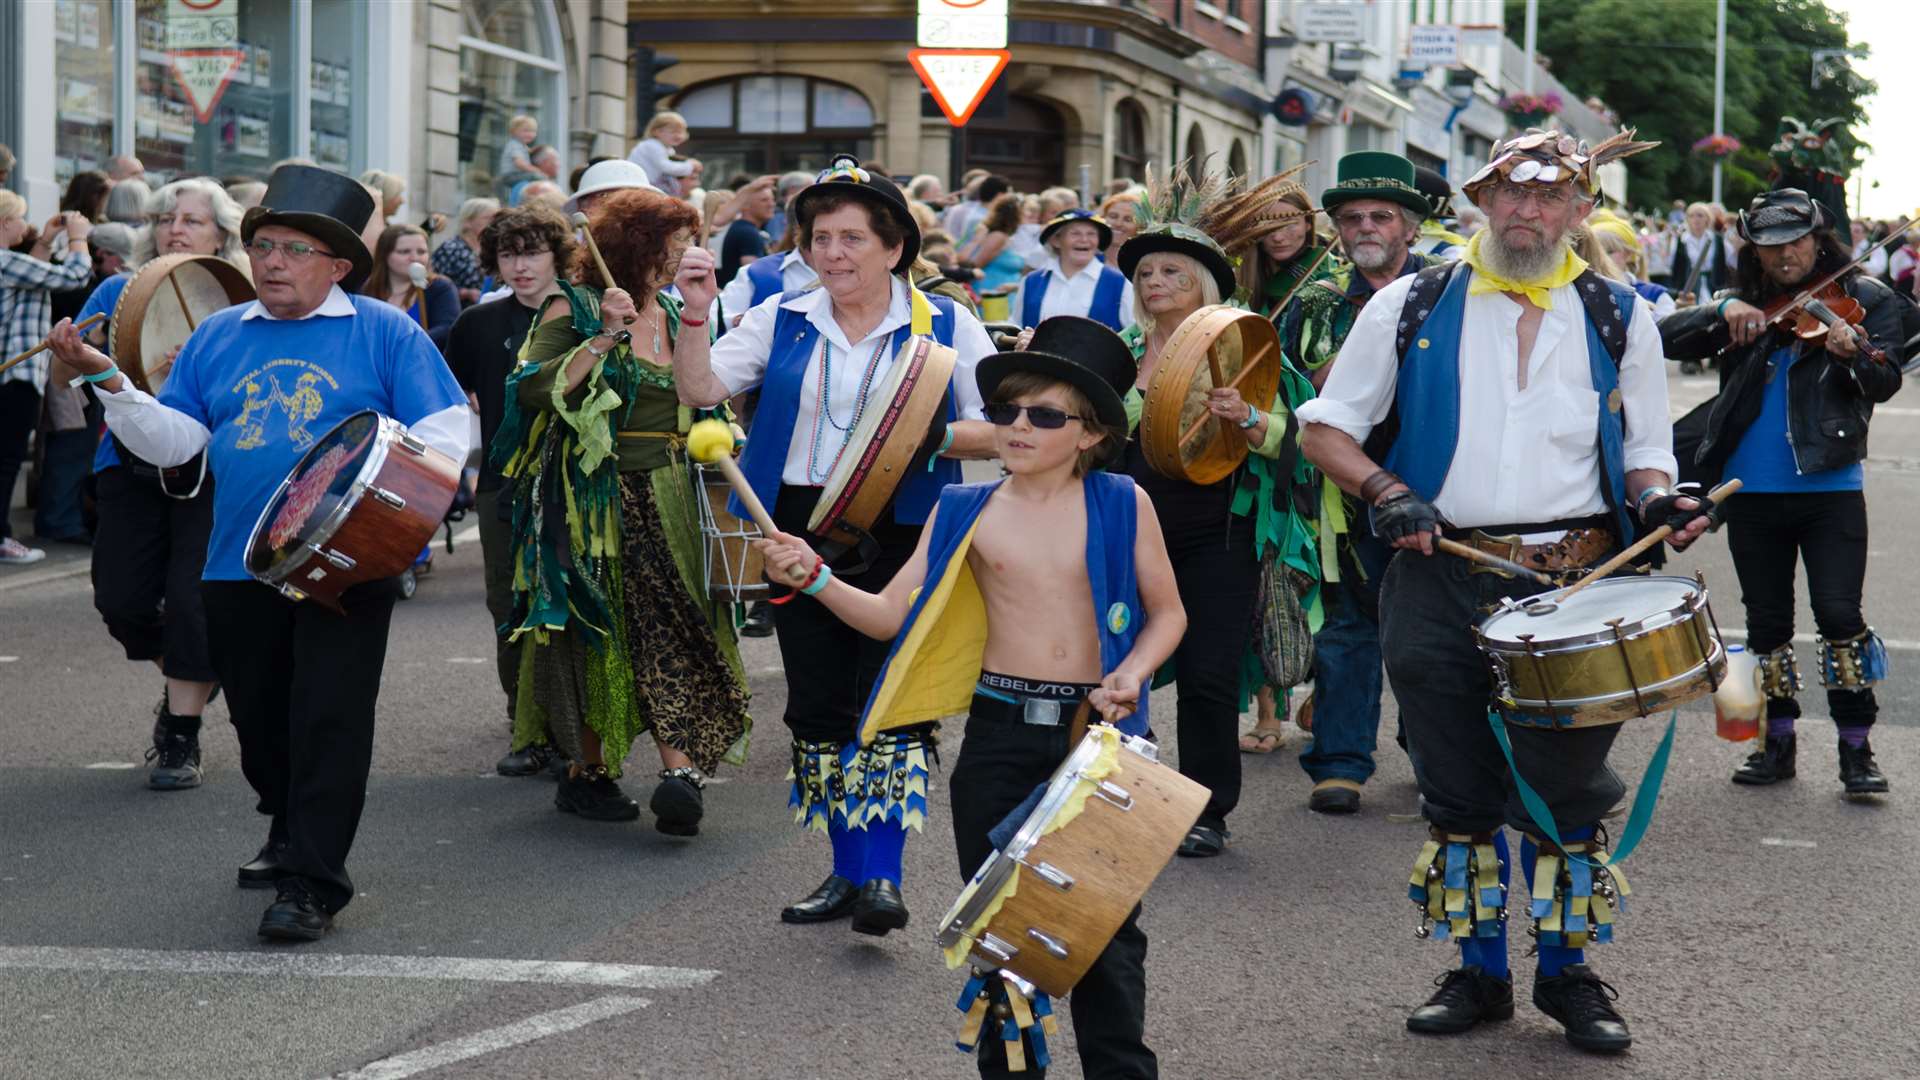 Morris dancers from around the country at a past Broadstiar's Folk Week. Picture: Roger Charles